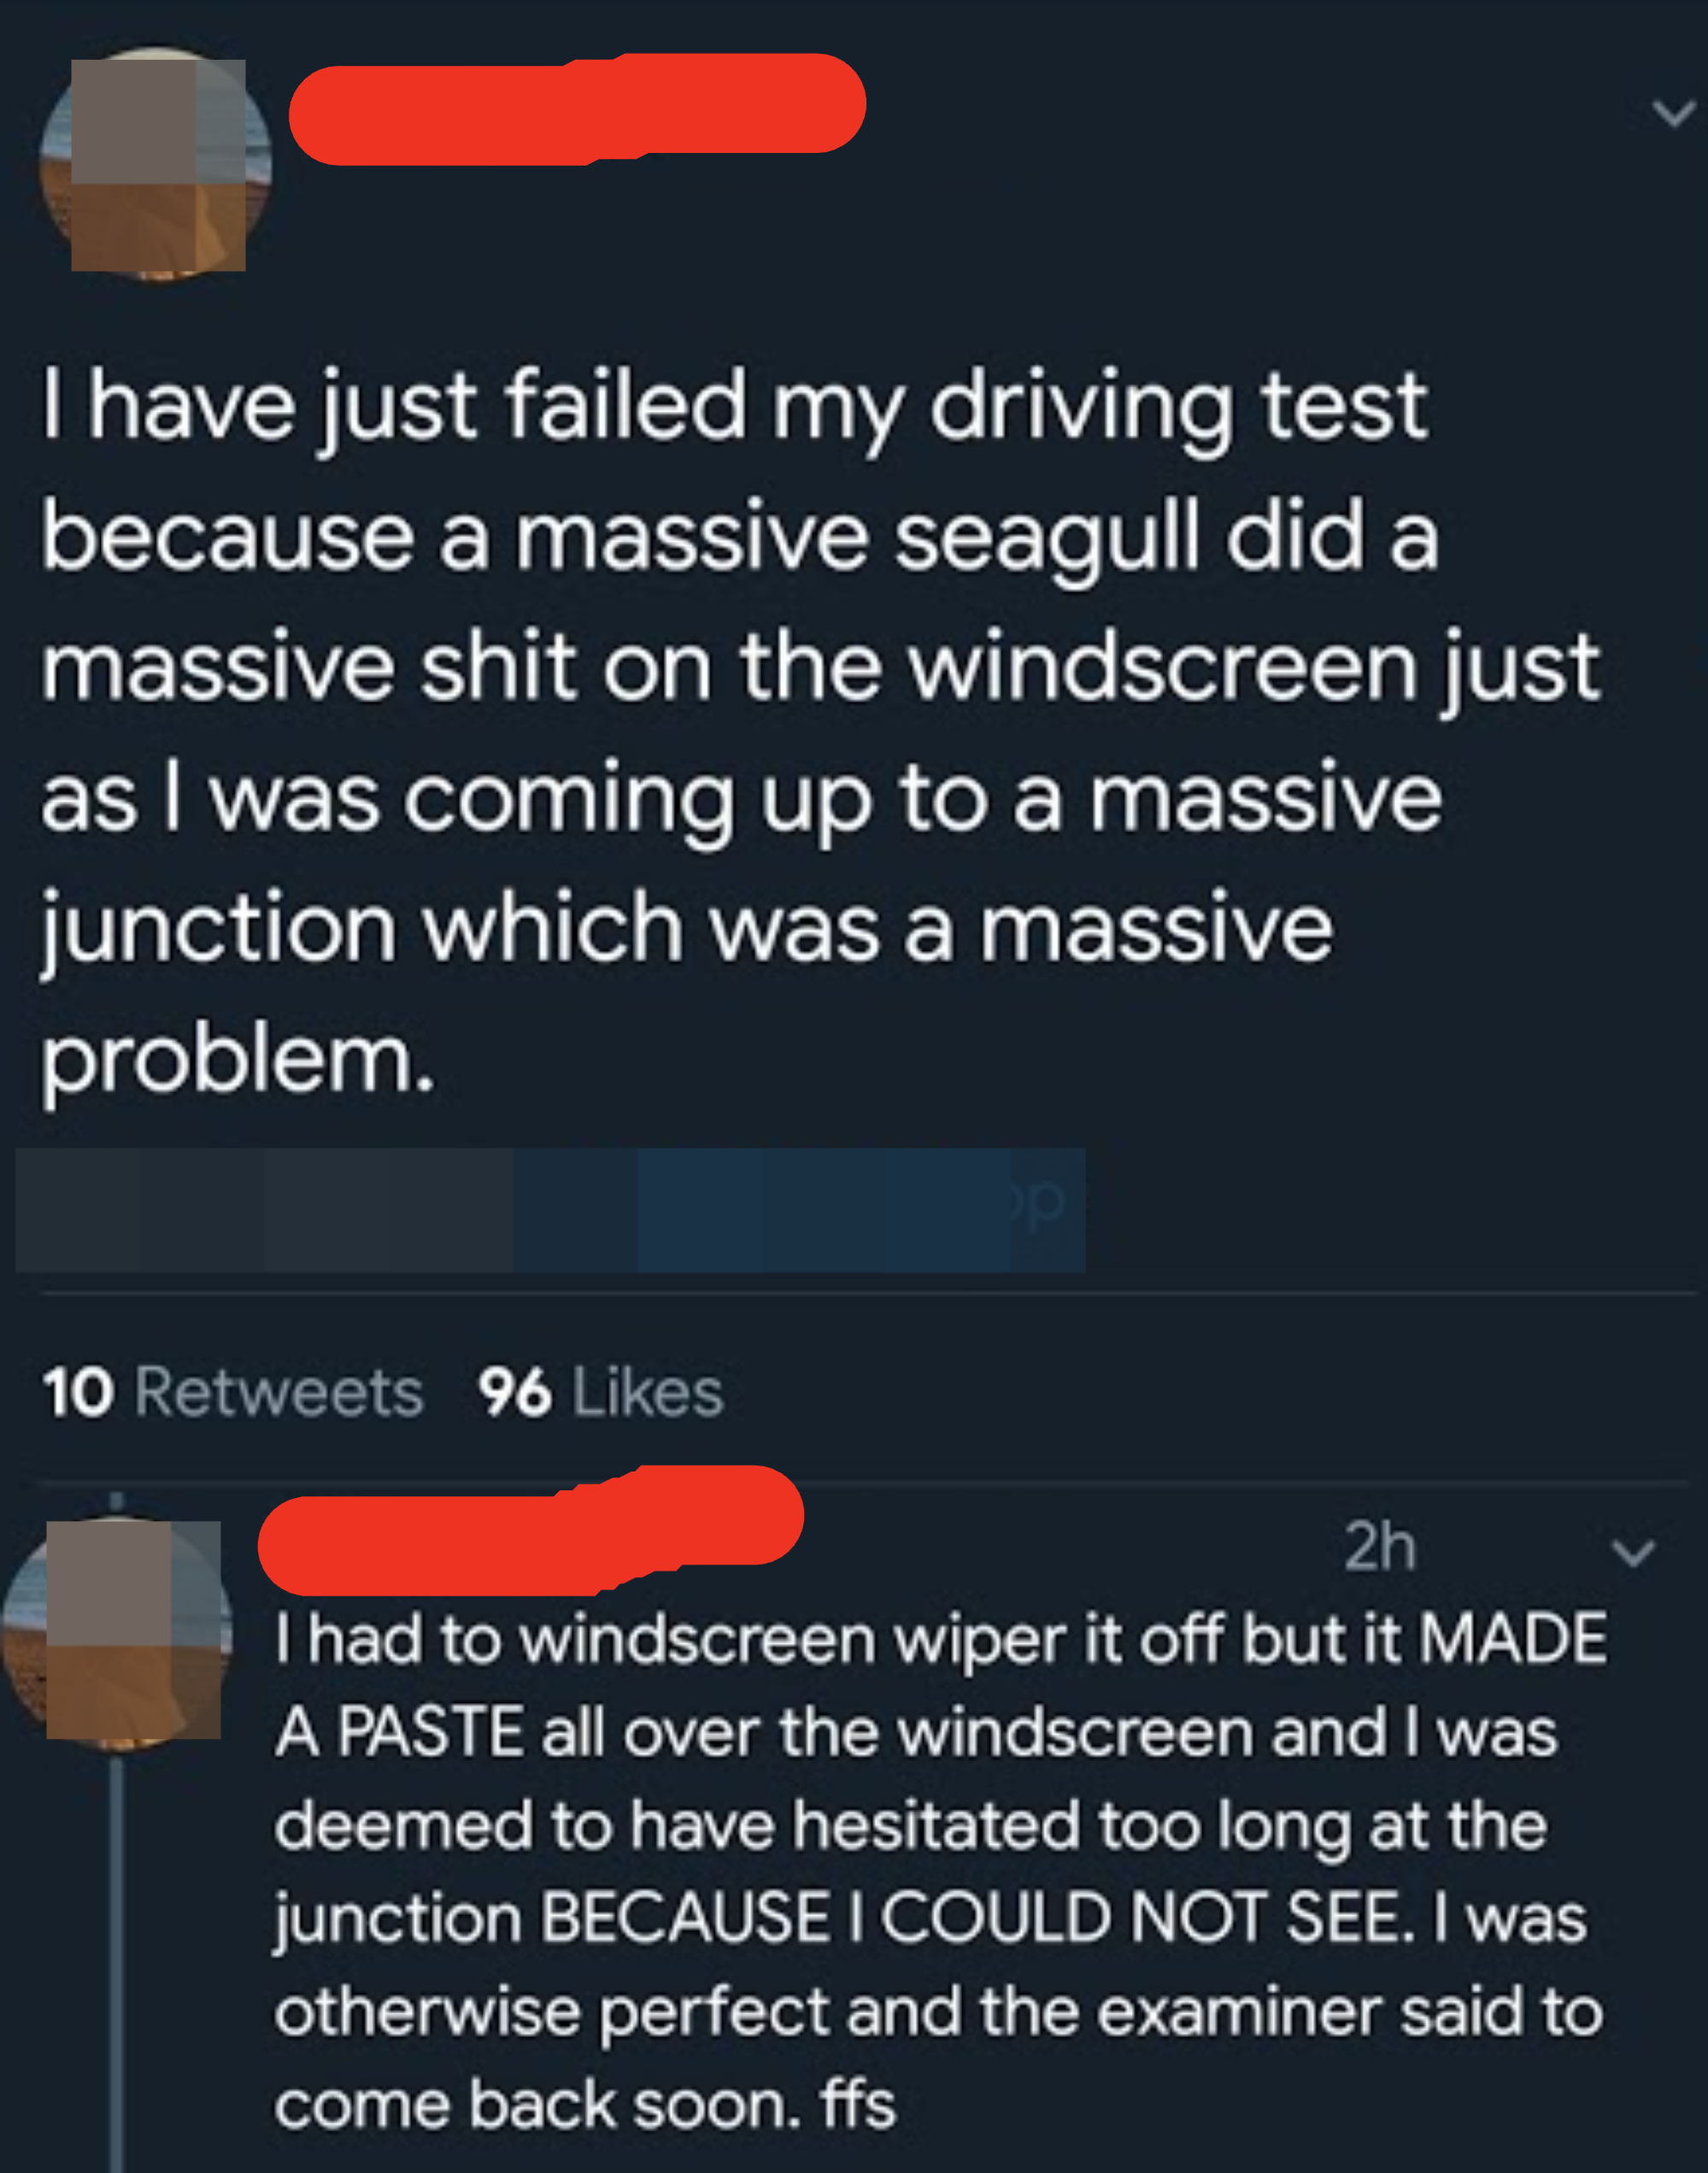 Person failed driving test because a seagull &quot;did a massive shit on the windscreen&quot; just as they were coming to a junction; the windscreen wiper made a paste and they took too long &#x27;cause they couldn&#x27;t see, but examiner said they were &quot;otherwise perfect&quot;